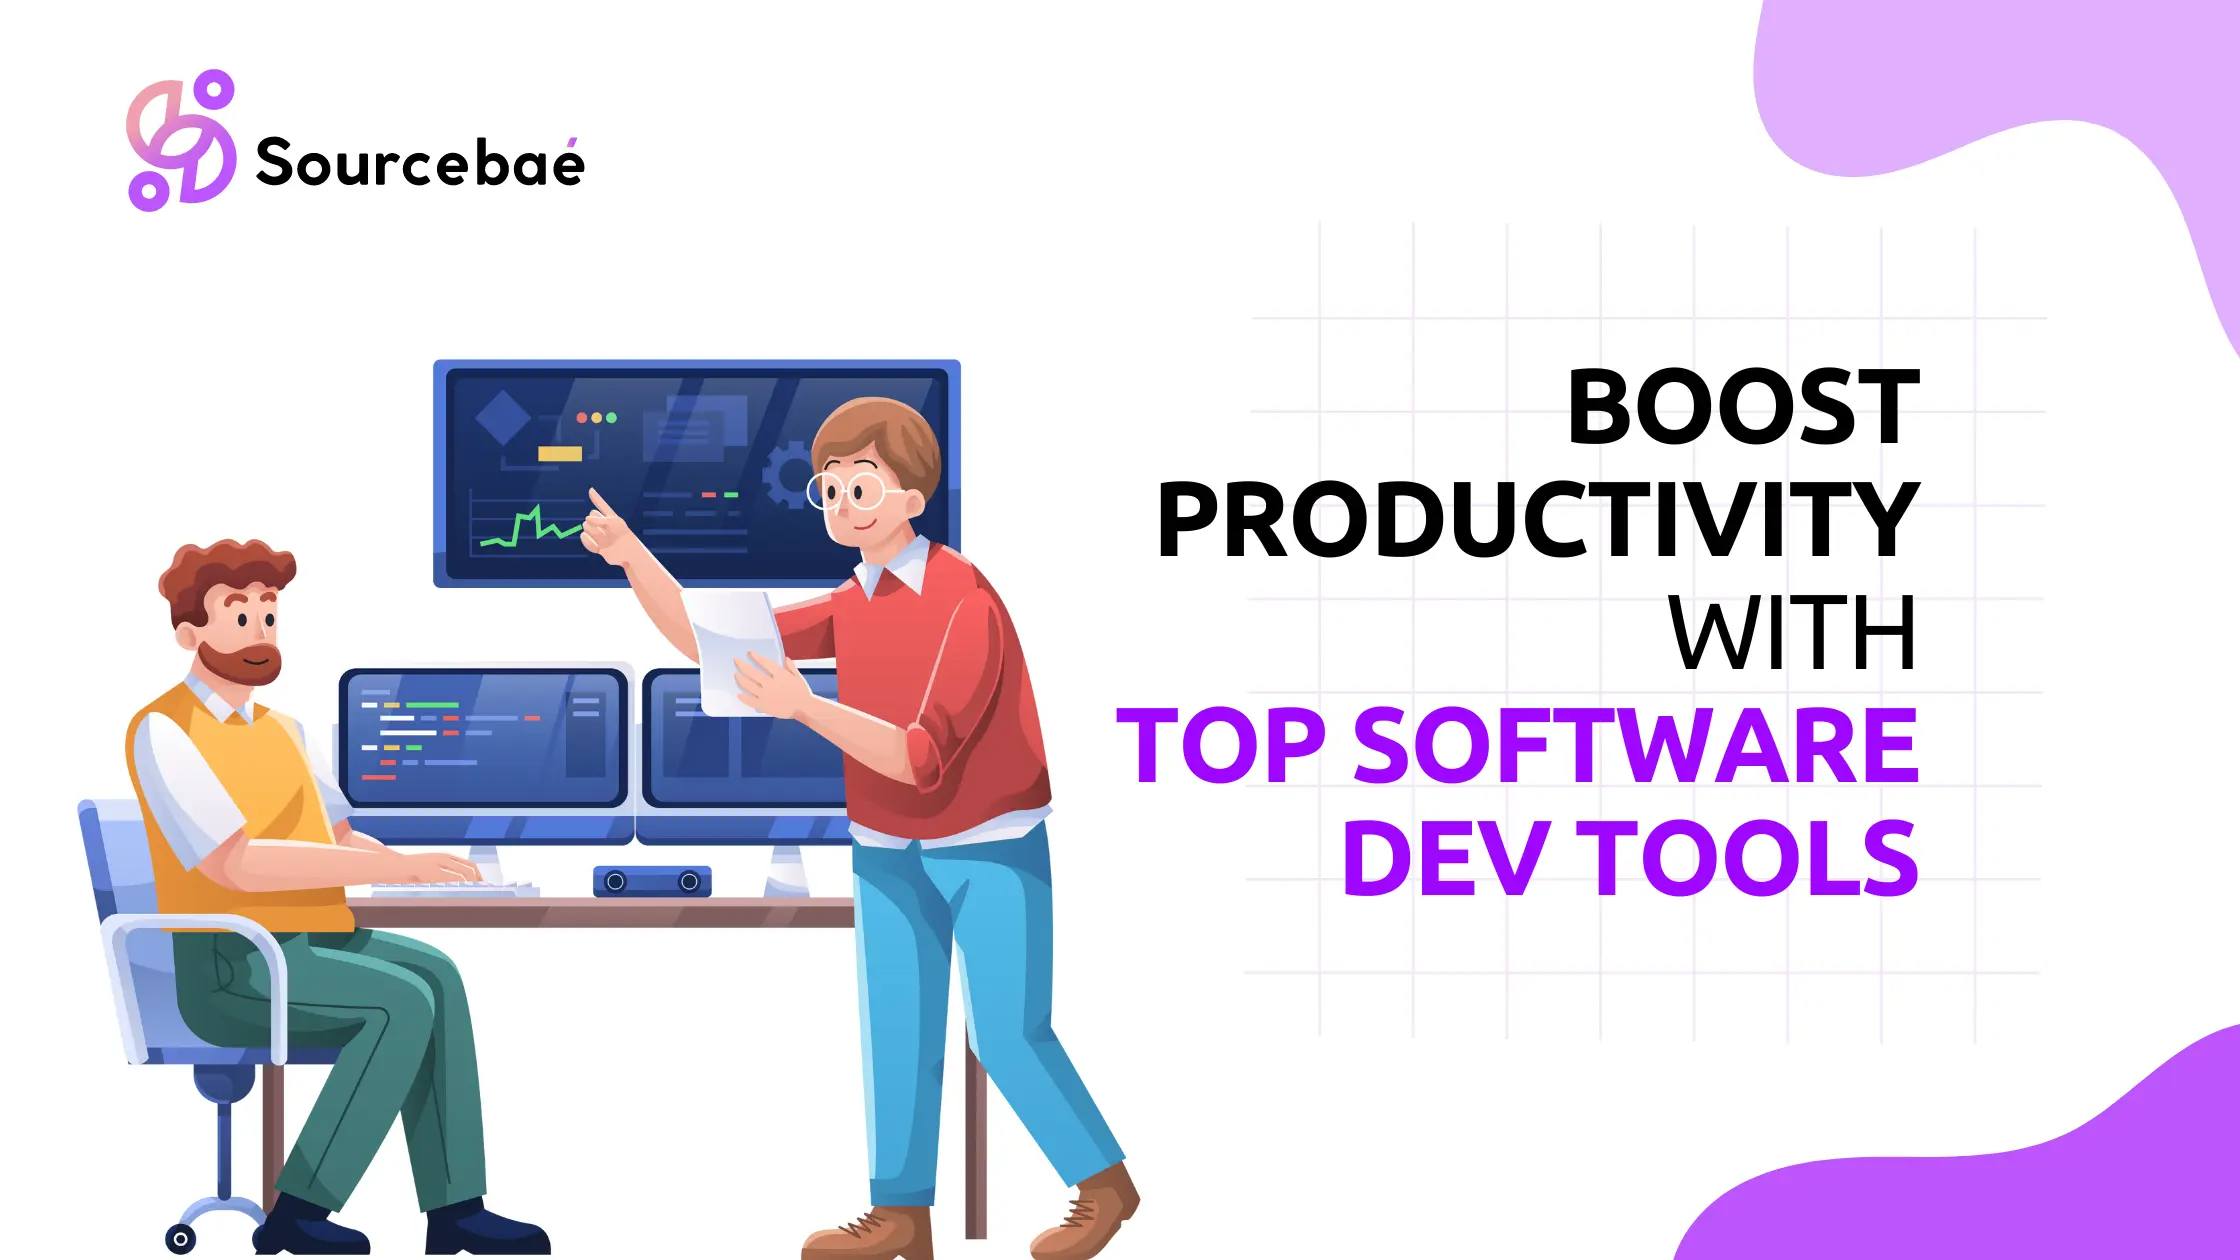 Top Software Development Tools to Improve Your Productivity